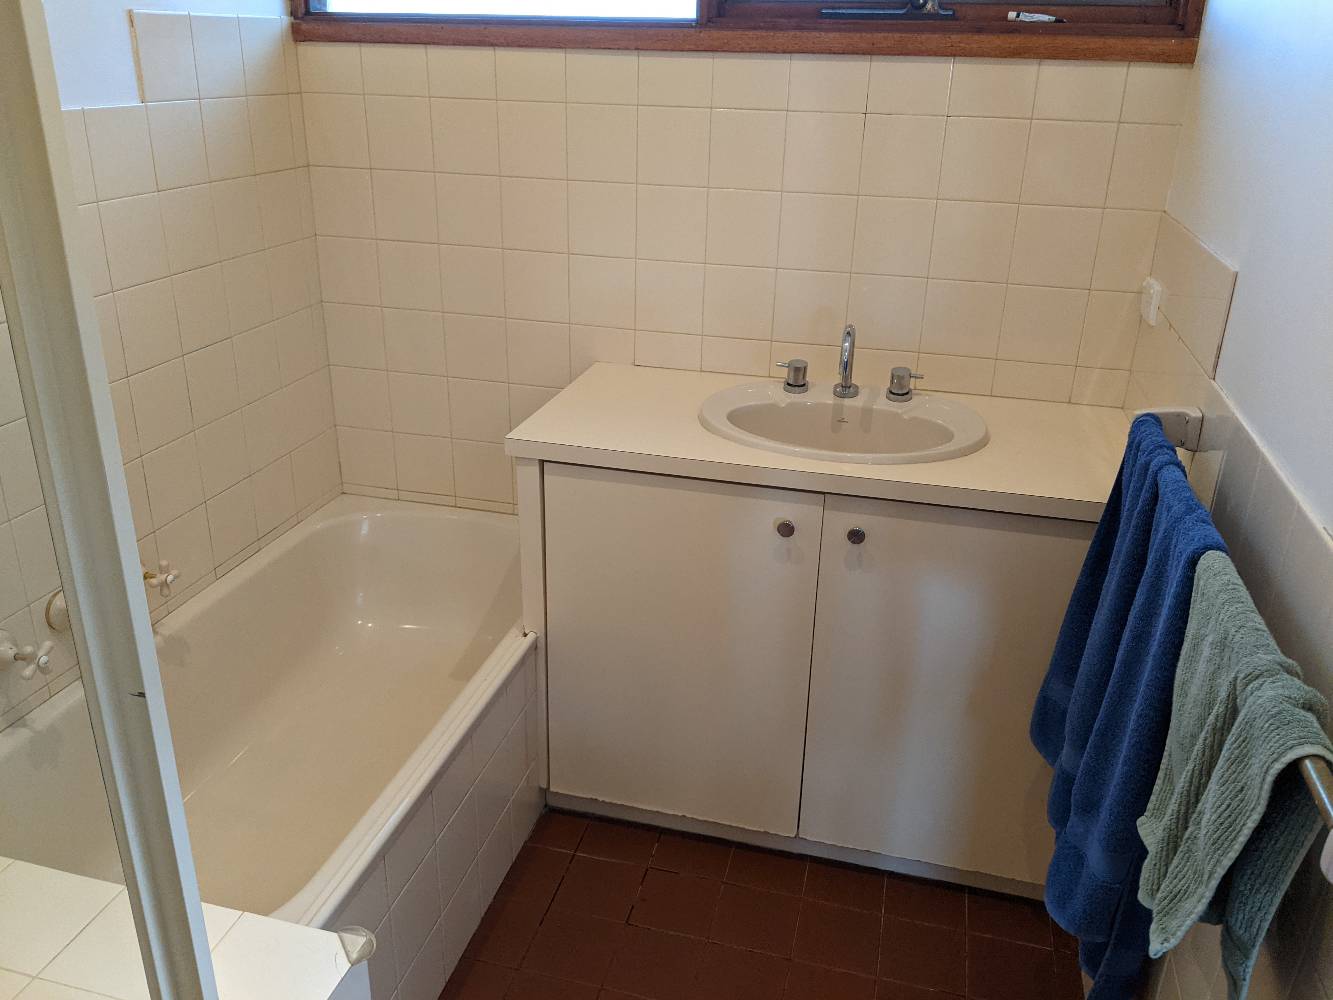 Main bathroom with shower, bath, separate toilet